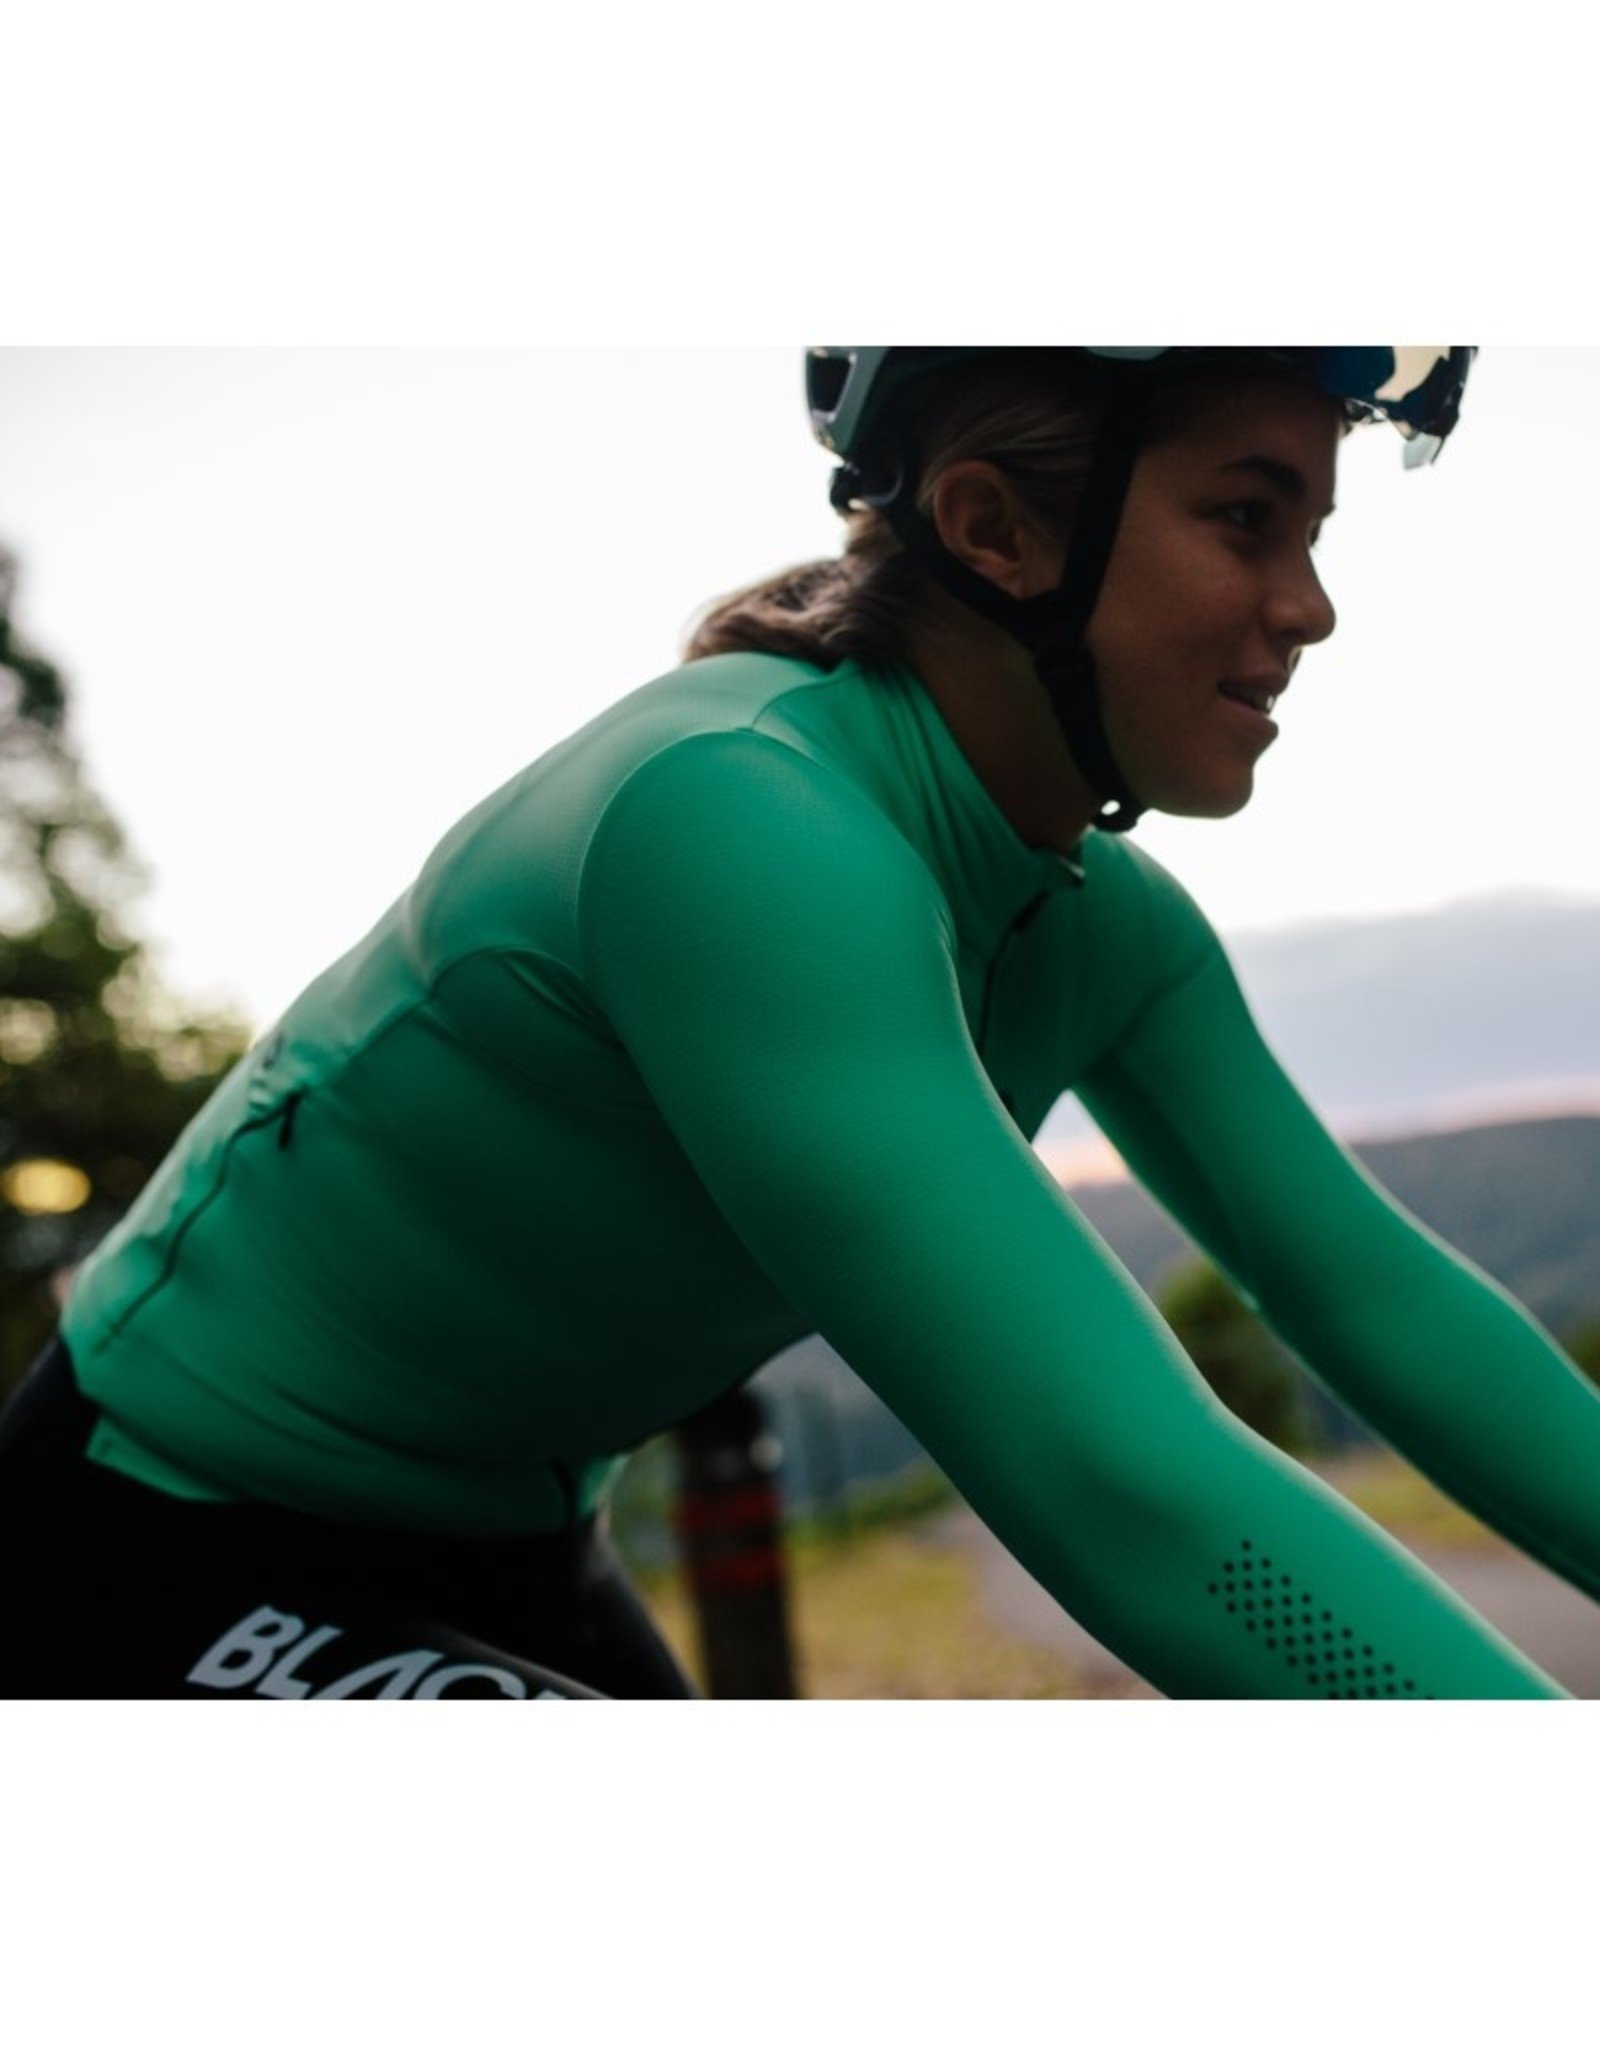 Black Sheep Cycling Women's Elements Thermal Jersey - Green